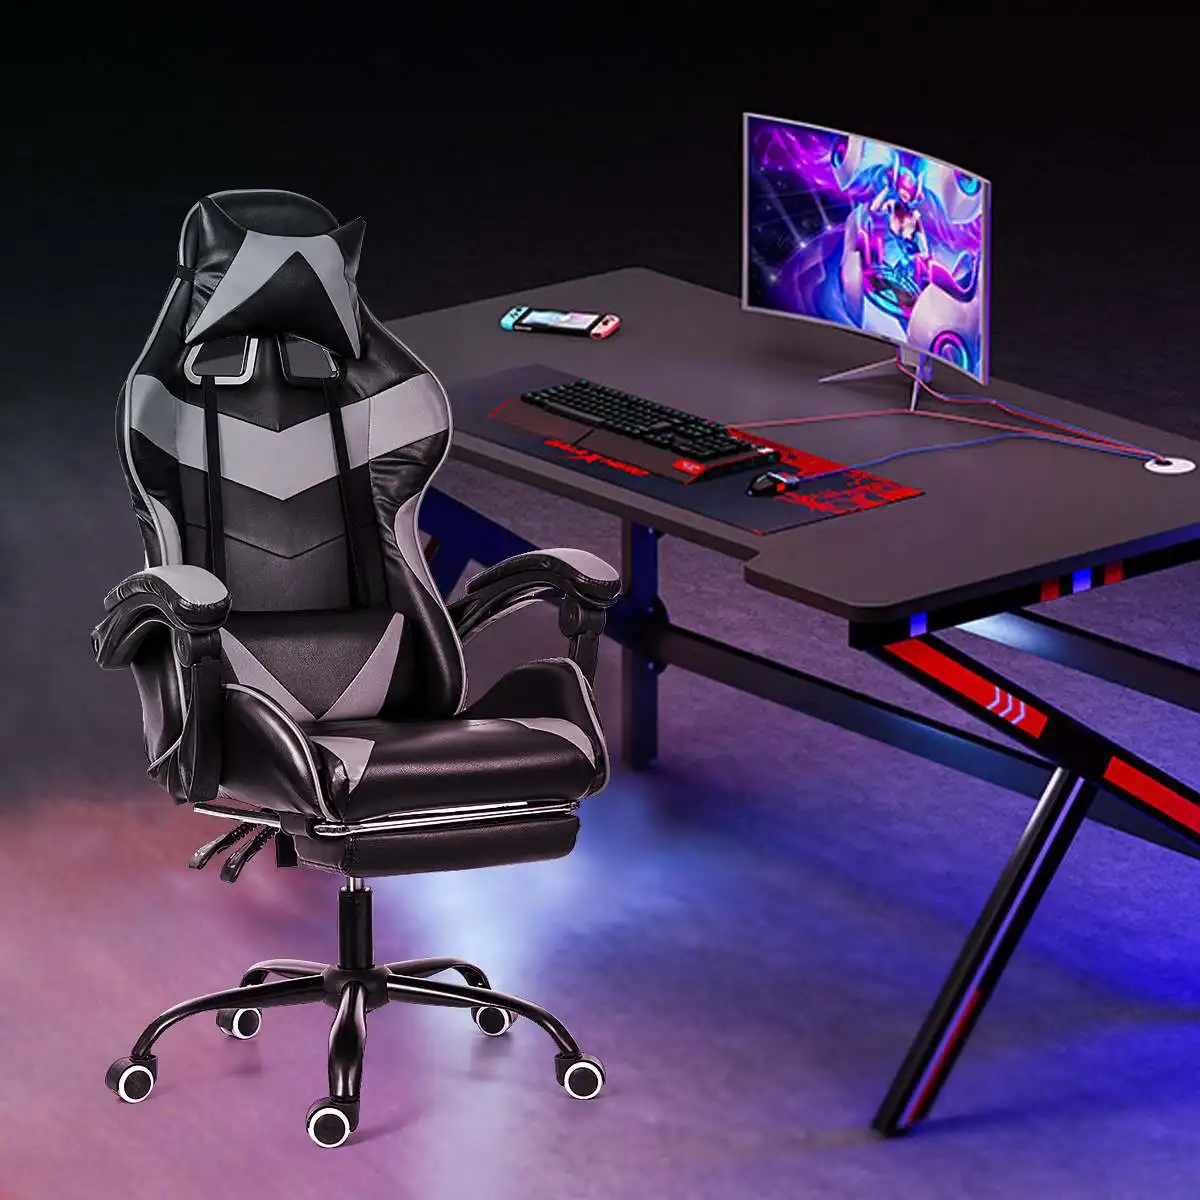 

Office Chair WCG Gaming Chair Home Internet Desk Computer Chair Ergonomic Office Gamer Chair with Footrest Swivel Lifting Lying